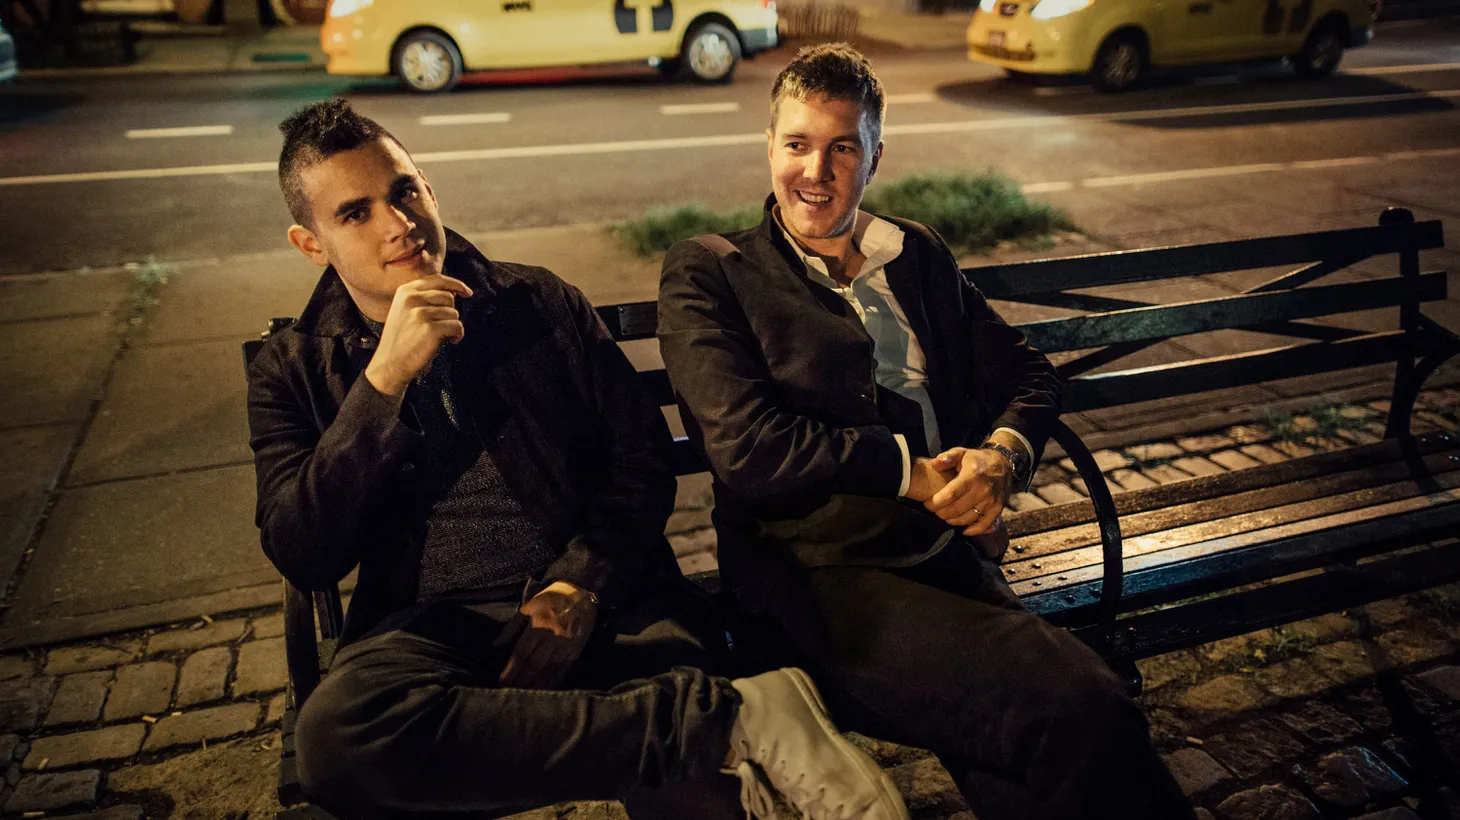 Hamilton Leithauser (The Walkmen) and Rostam Batmanglij (Vampire Weekend) joined forces for a collaboration that has been met with overwhelming praise and acclaim.